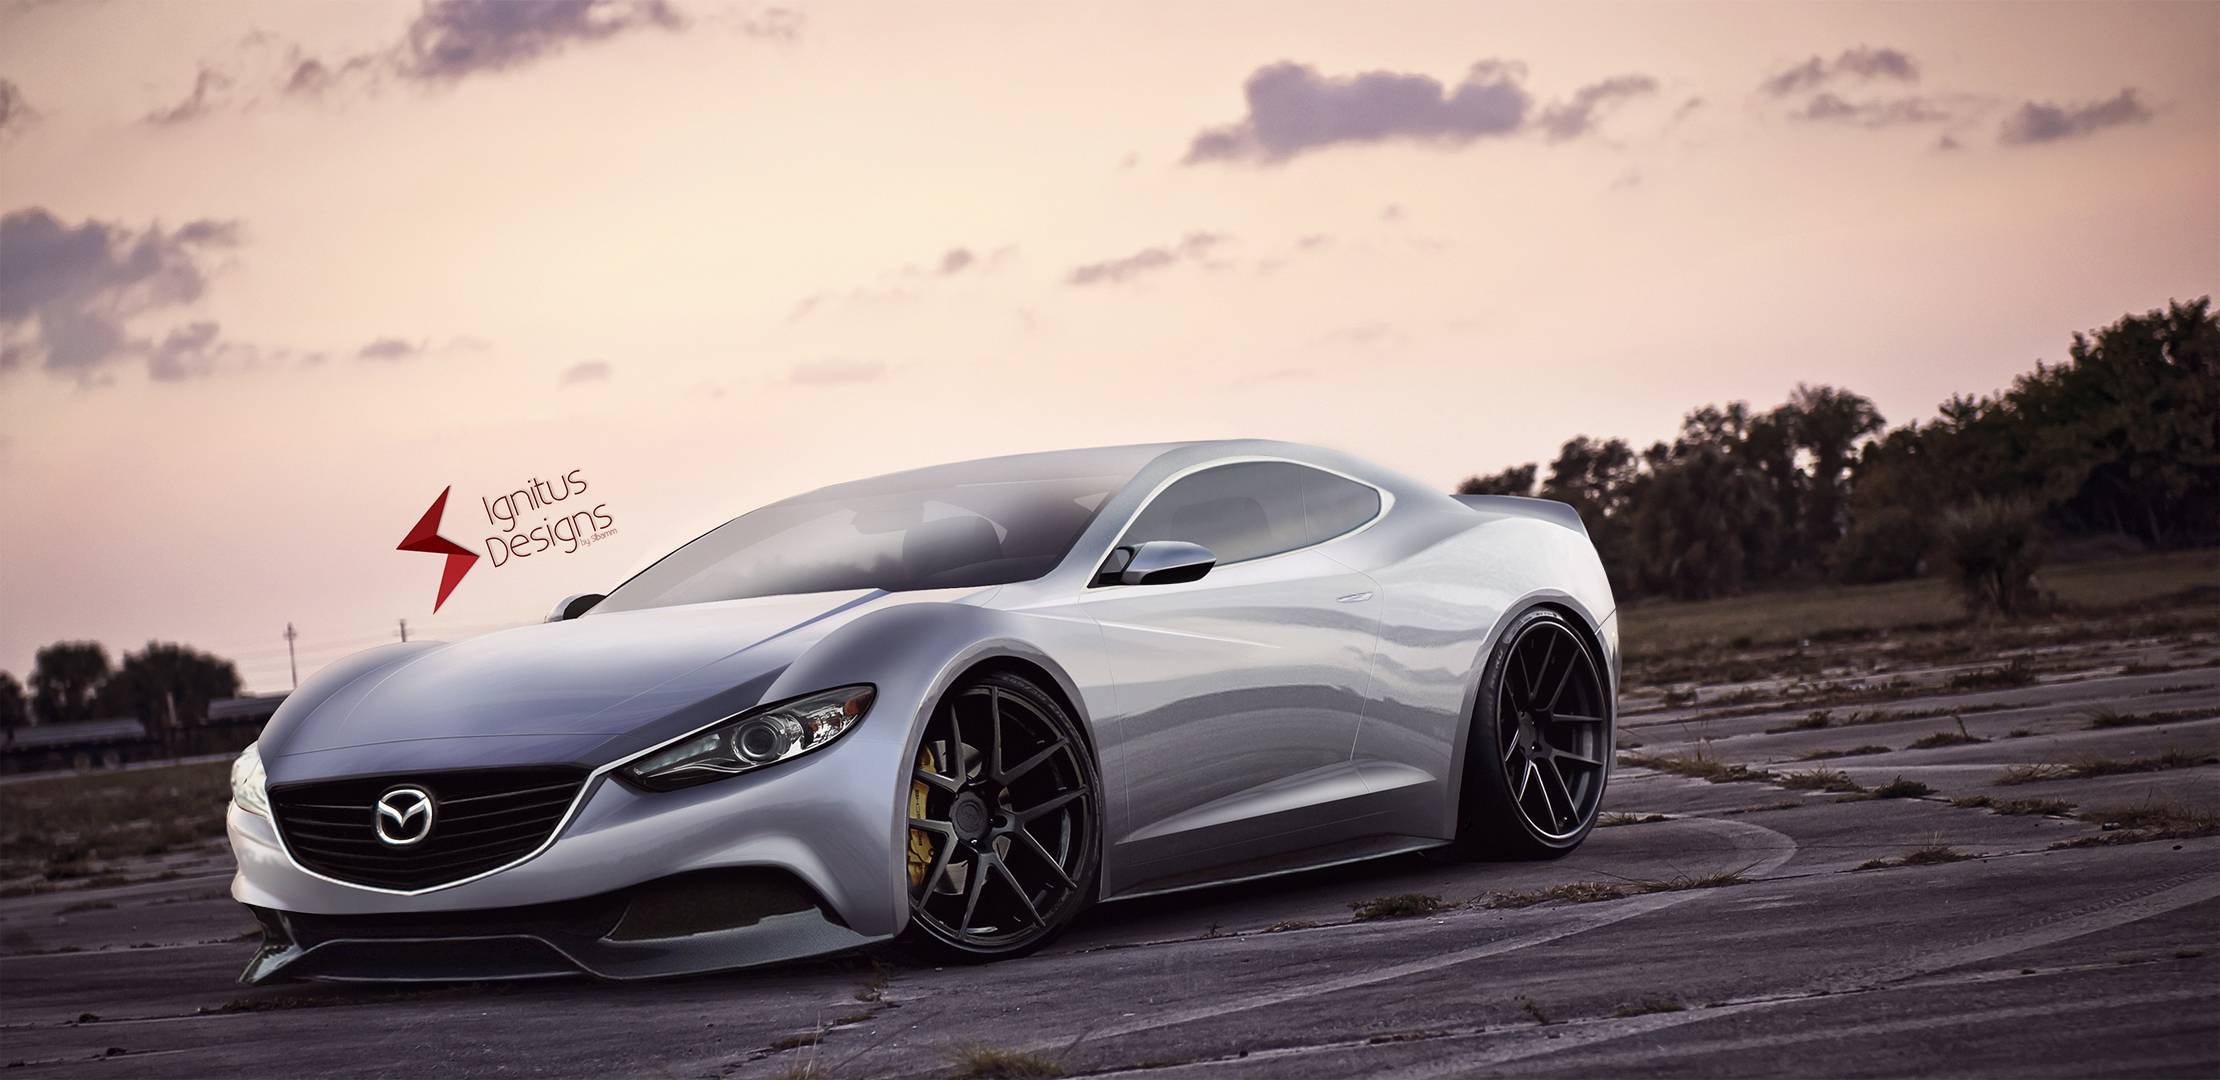 Mazda Coupe Concept by Ignitus Designs